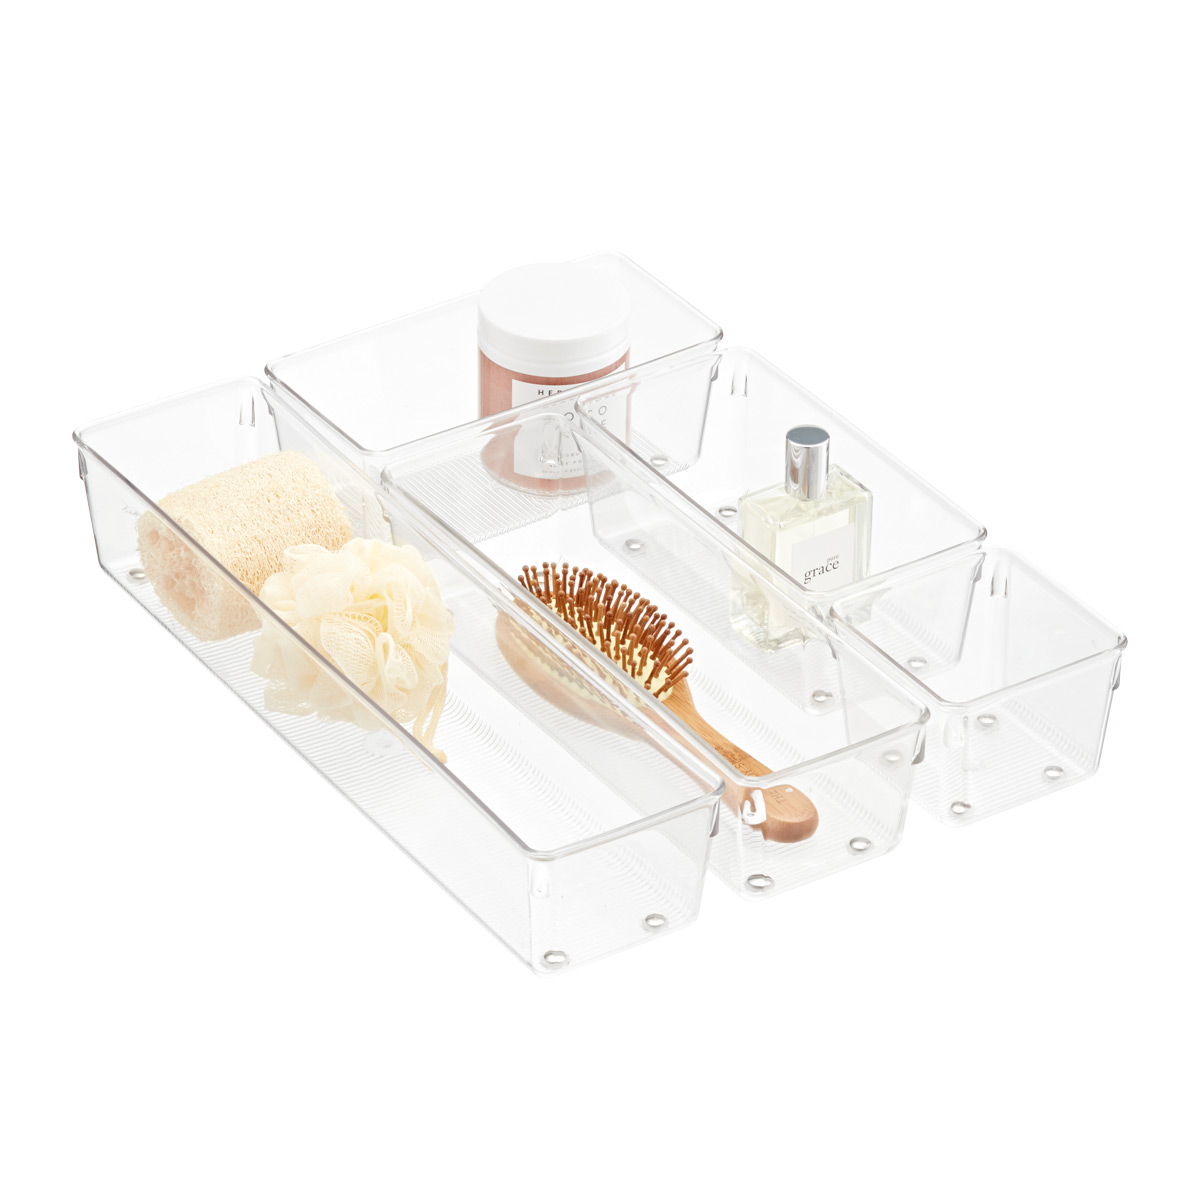 Bathroom Drawer Organizers Acrylic Drawer Organizers The Container Store